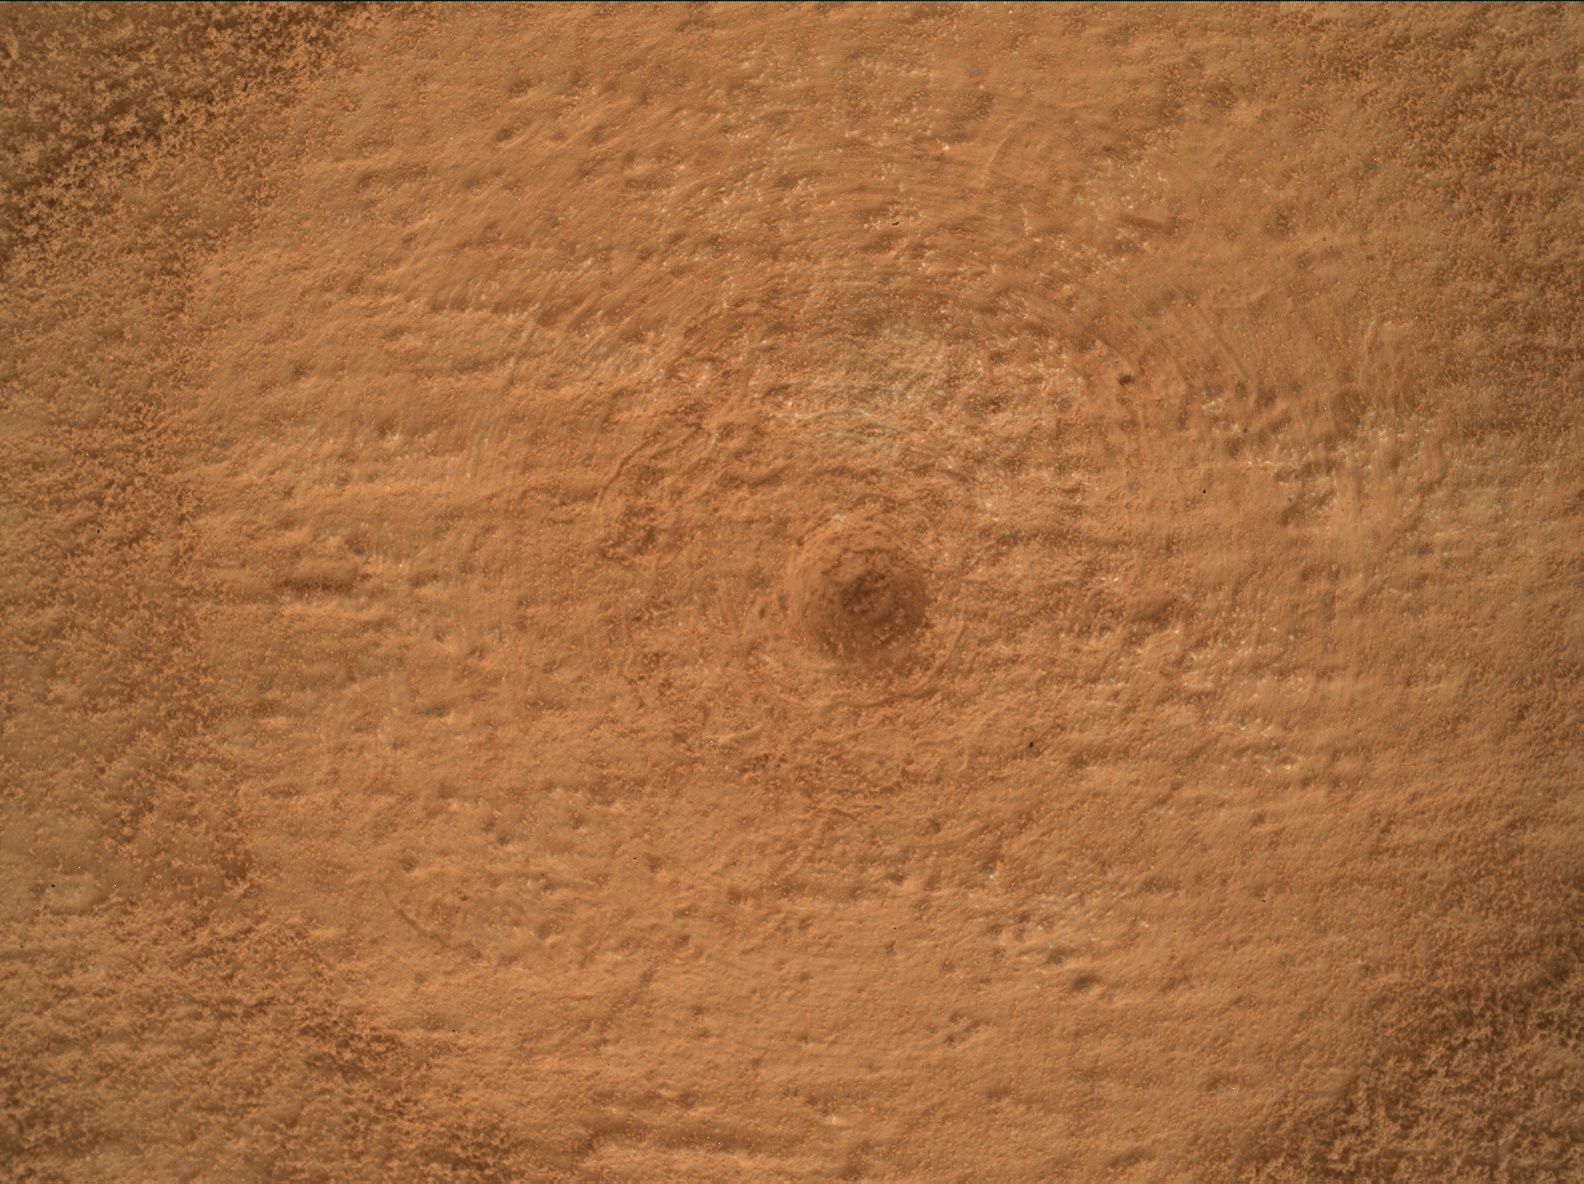 Nasa's Mars rover Curiosity acquired this image using its Mars Hand Lens Imager (MAHLI) on Sol 3488